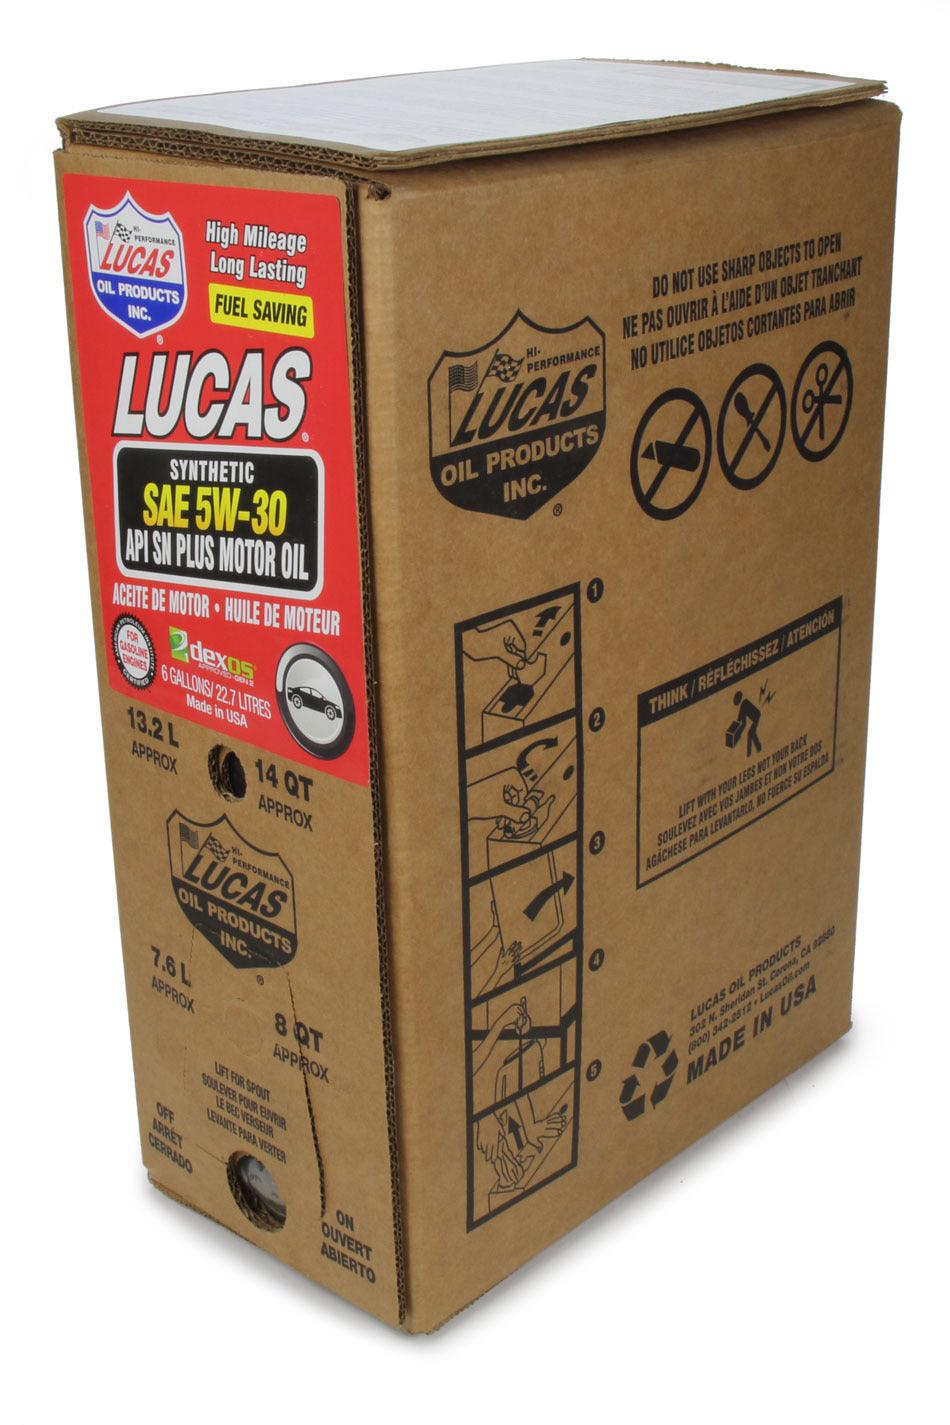 Synthetic SAE 5W30 Oil 6 Gallon Bag In Box Dexos - Burlile Performance Products